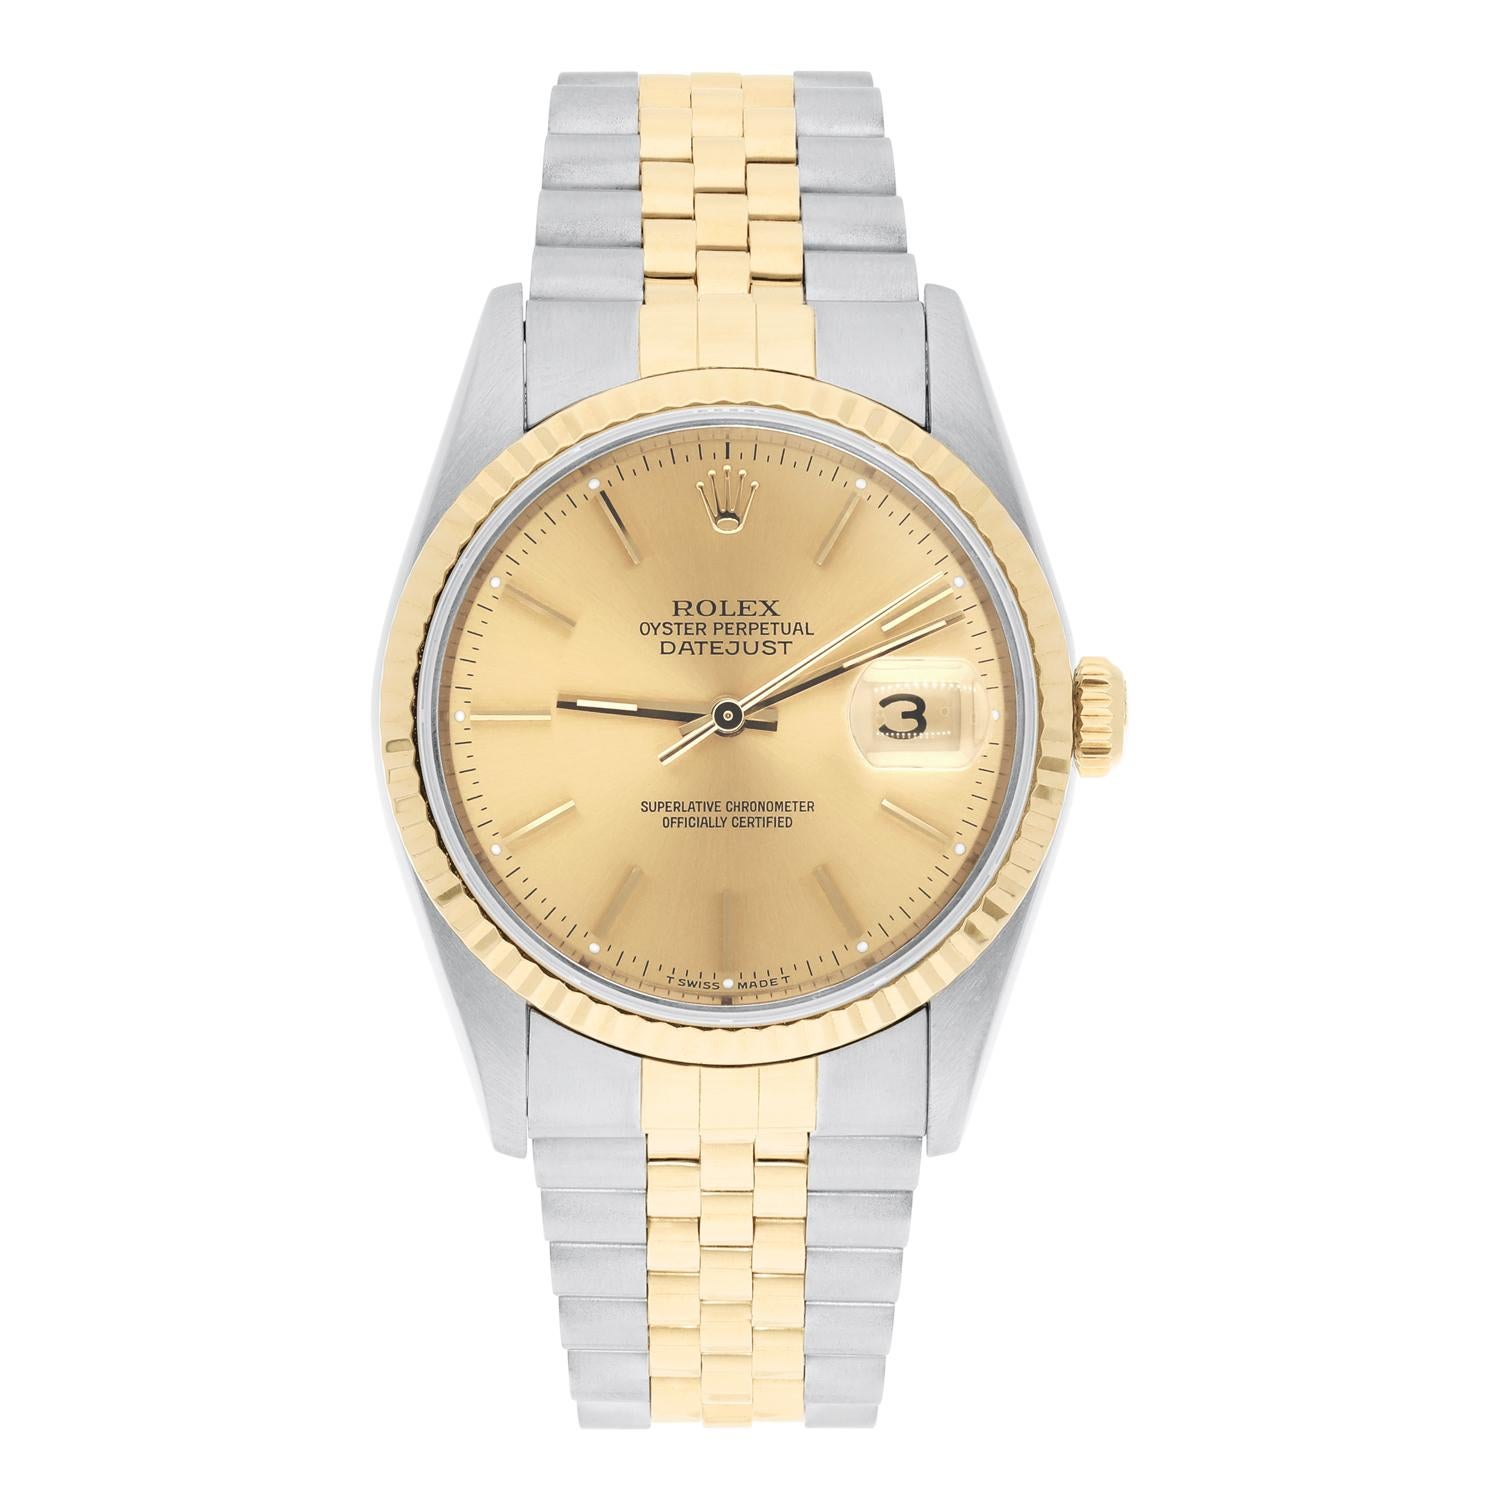 This watch has been professionally polished, serviced and is in excellent overall condition. There are absolutely no visible scratches or blemishes. Model features quick-set movement, no holes case. Authenticity guaranteed! The sale comes with a